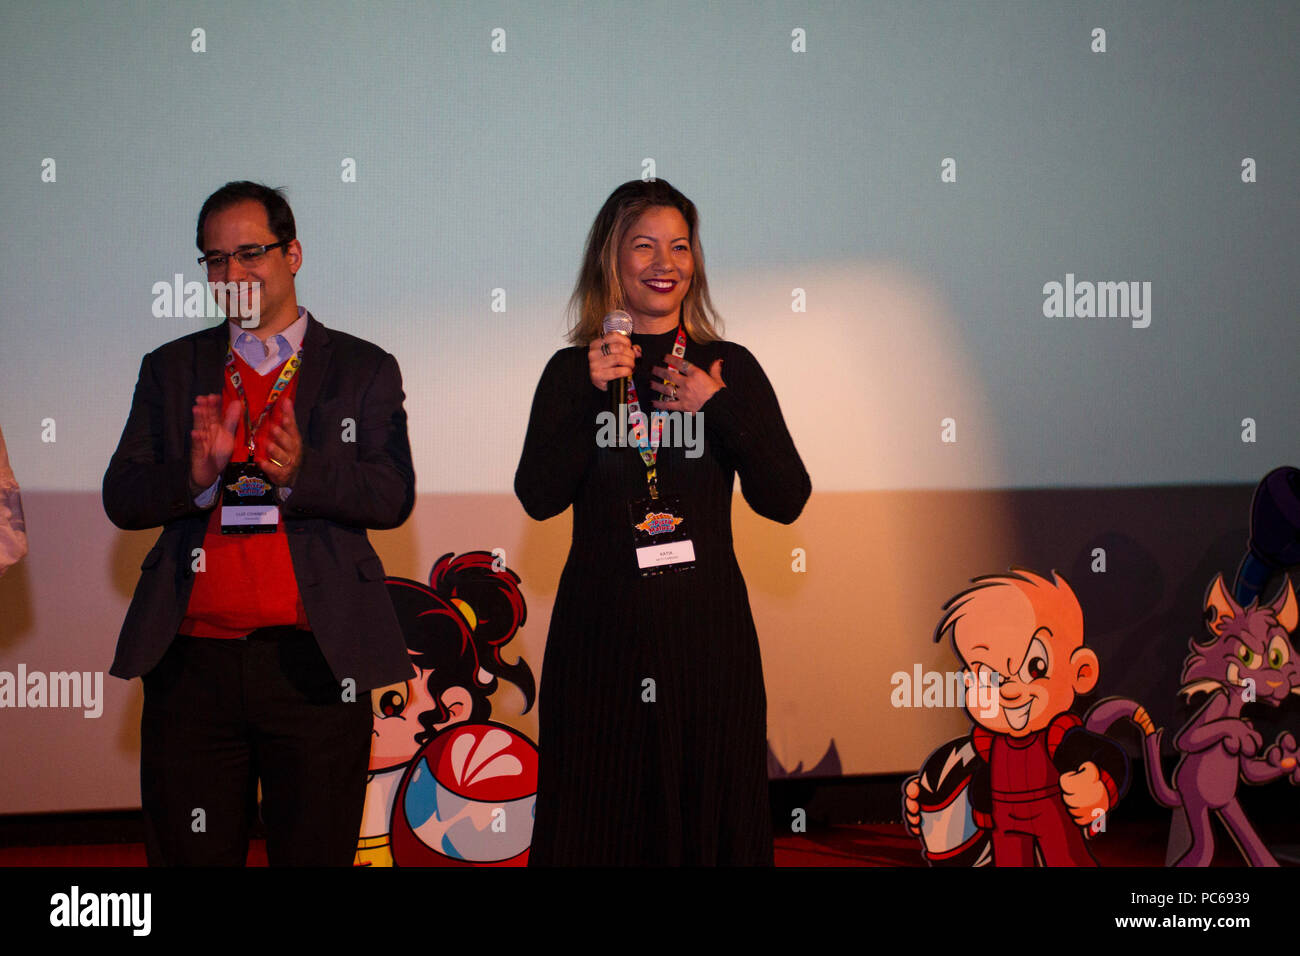 SÃO PAULO, SP - 31.07.2018: ANIMAÇÃO DO SENNINHA É LANÇADA EM SP - This event was held on Tuesday (31) the launch event of the new animated series of the character Senninha that will premiere on 08/08 on Gloobat&#39;s Globosat channel. The animation that is inspired by thtime Formulamula 1 champion Ayrton Senna is called &quot;Senninha na Pista Maluca&quot; (&quot;Snha naa na Pista Maluca&;), h ha epi episodes, es, each ach with 11 minutes, which will be shown daily at various times. Highlights include Luiz Coimbra, relations manager at Itaucard and Kátia Leaes, marketing coordinator at Beto C Stock Photo